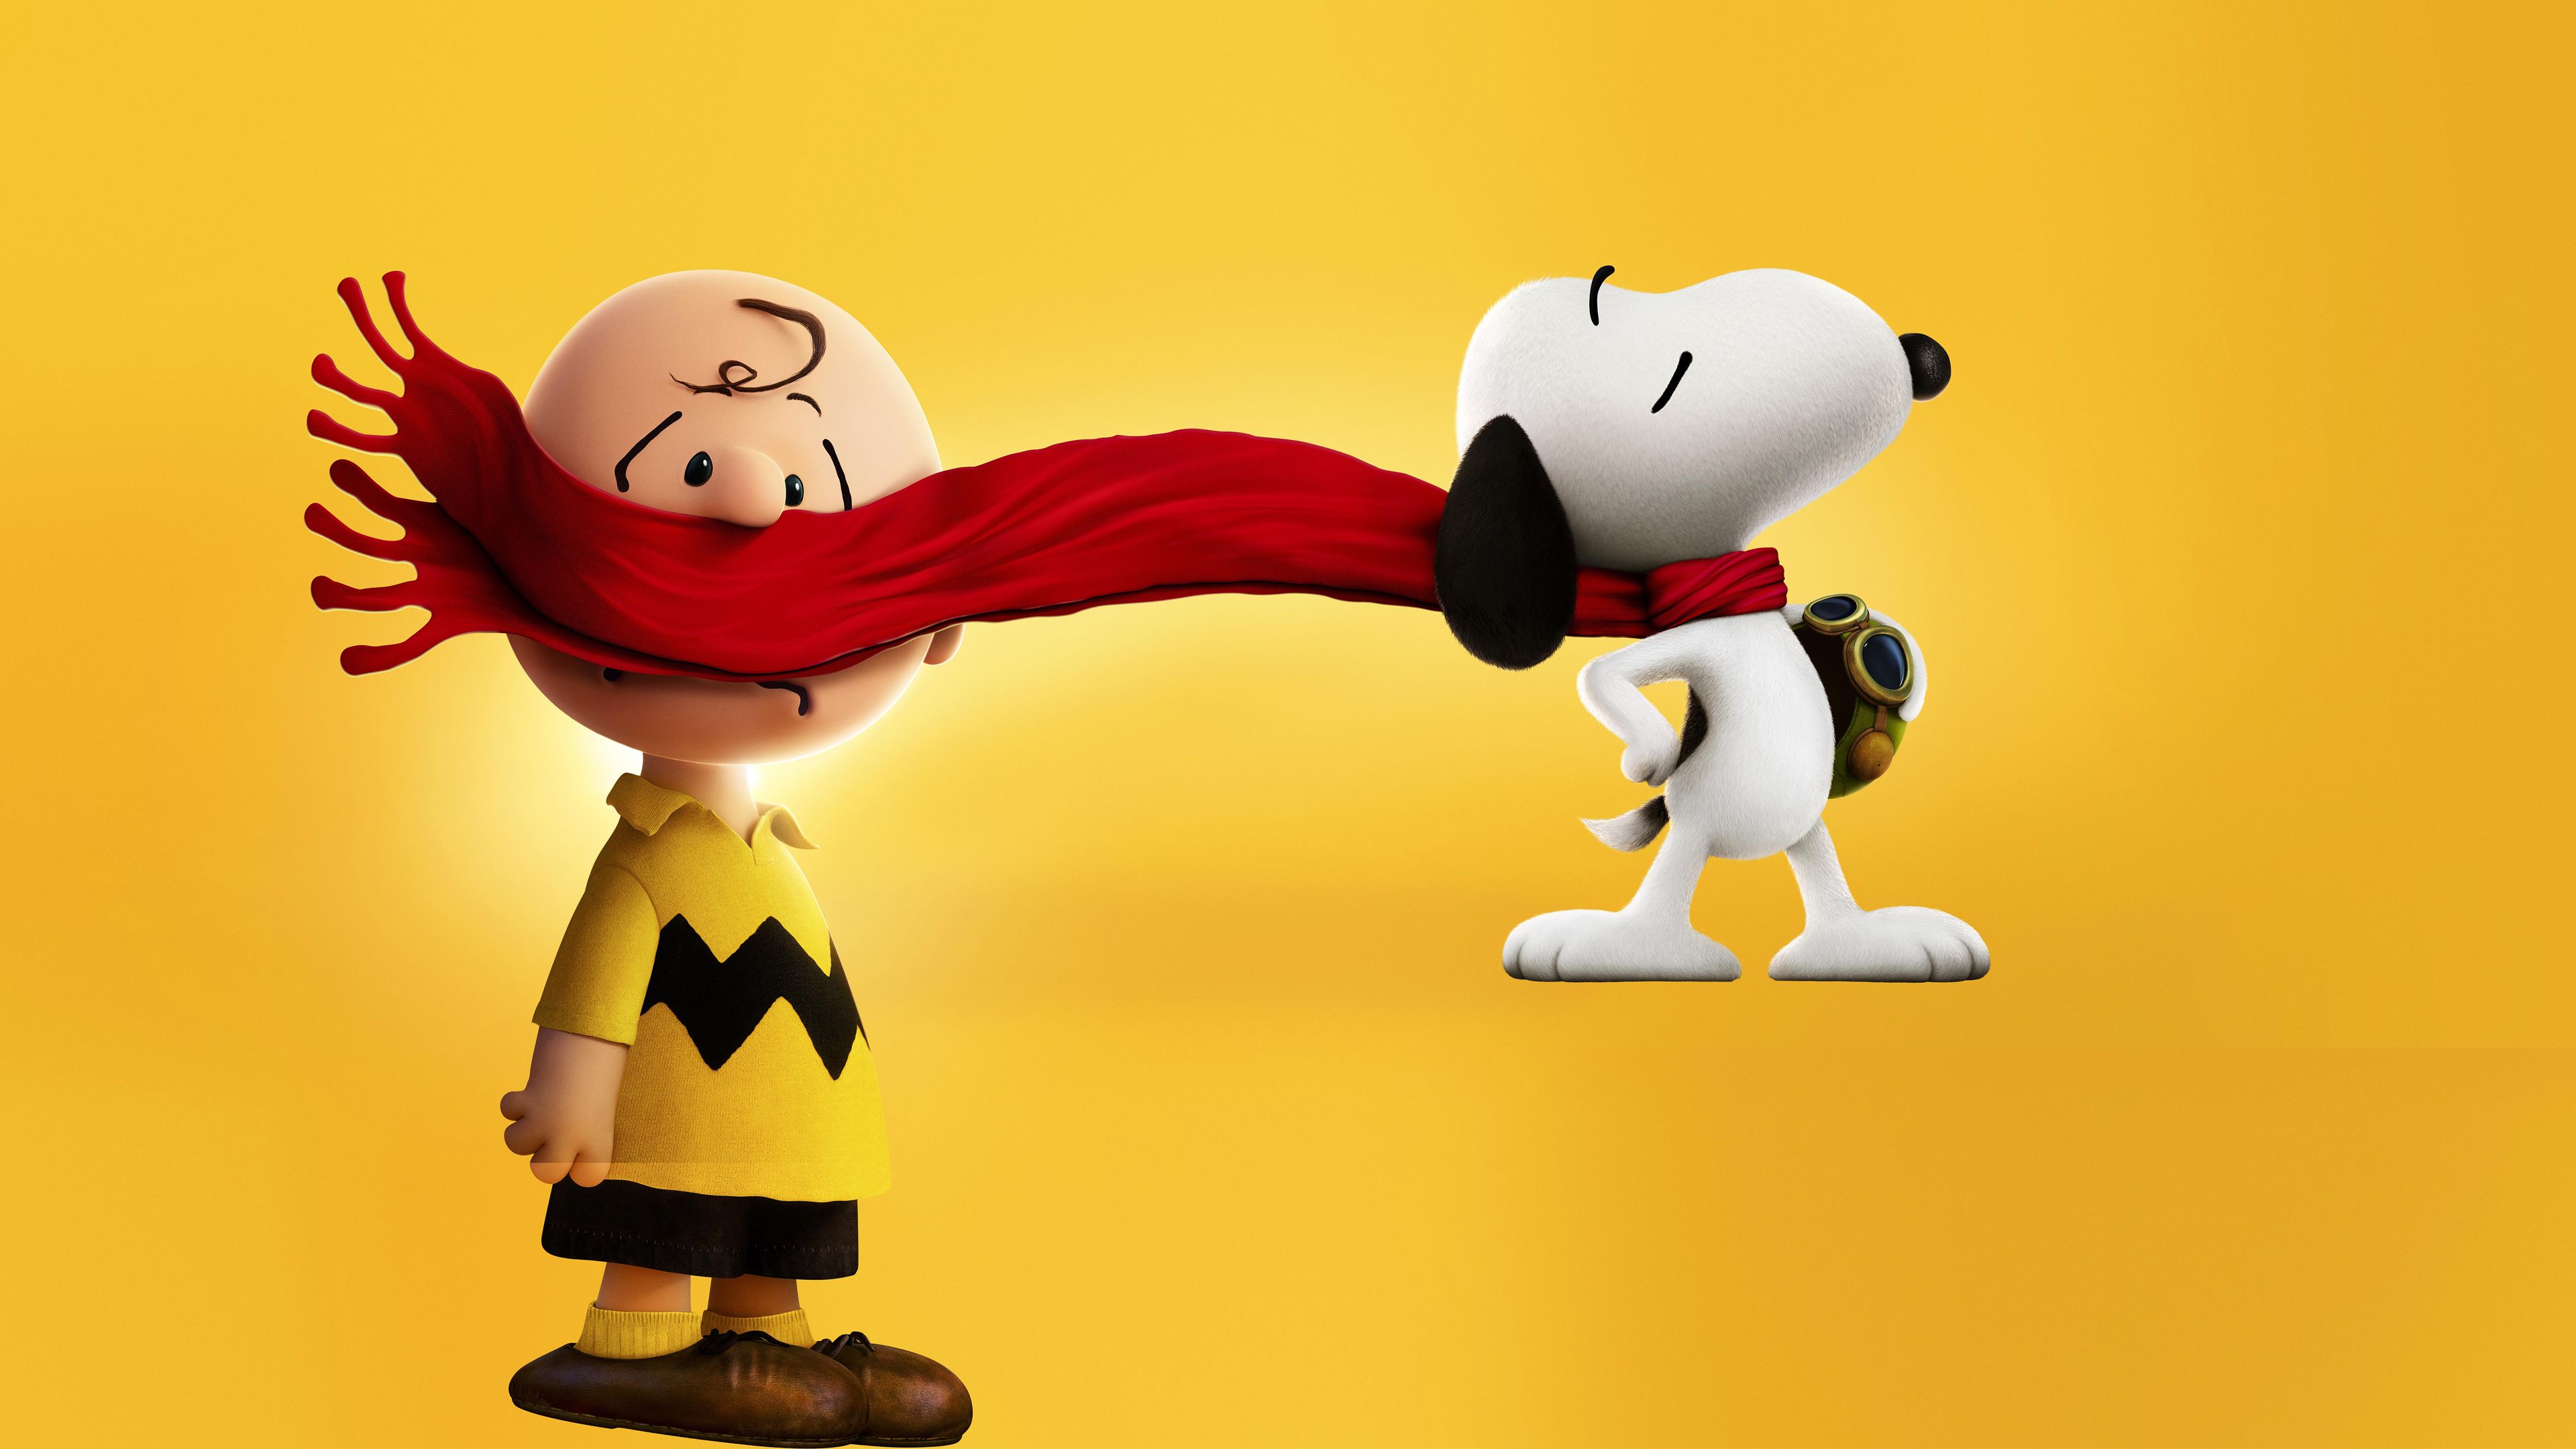 A cartoon character with red hair and snoopy - Charlie Brown, Snoopy